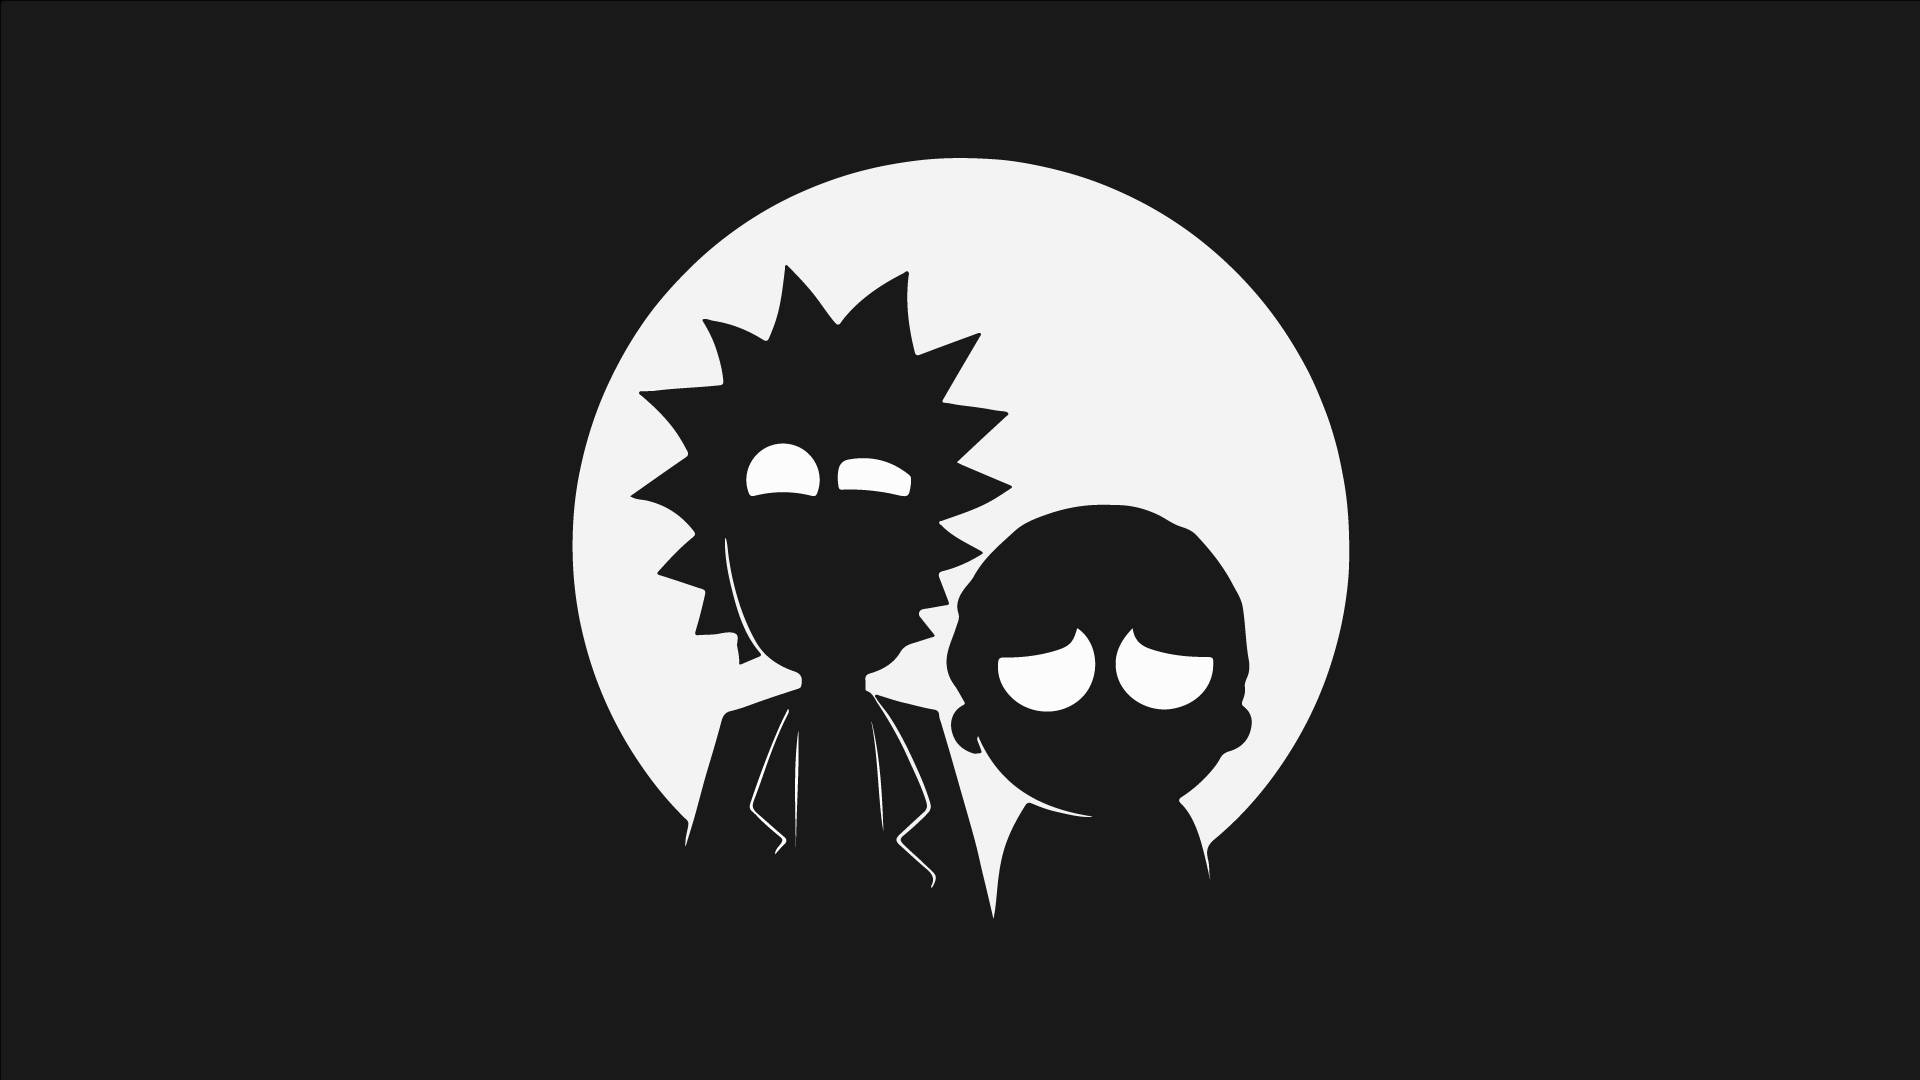 'From the hit show Rick and Morty, these two silhouettes bring life to the world of science fiction adventures.' Wallpaper